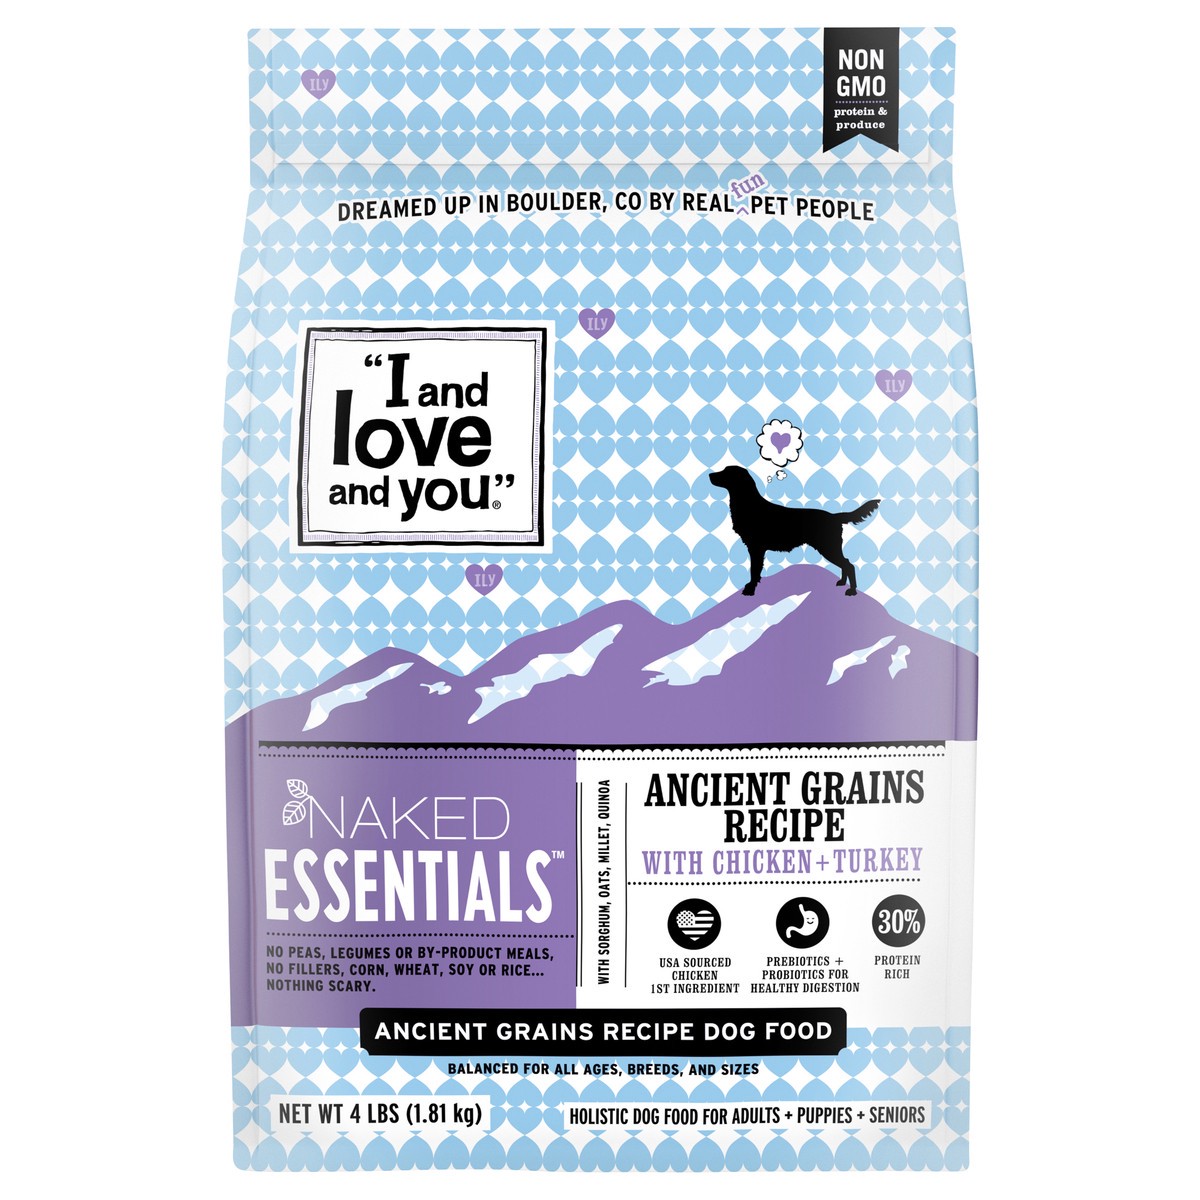 slide 1 of 10, I and Love and You "I and love and you" Naked Essentials Ancient Grains Dry Dog Food, Chicken and Turkey Recipe, Prebiotics and Probiotics, Real Meat, No Fillers, 4lb Bag, 4 lb